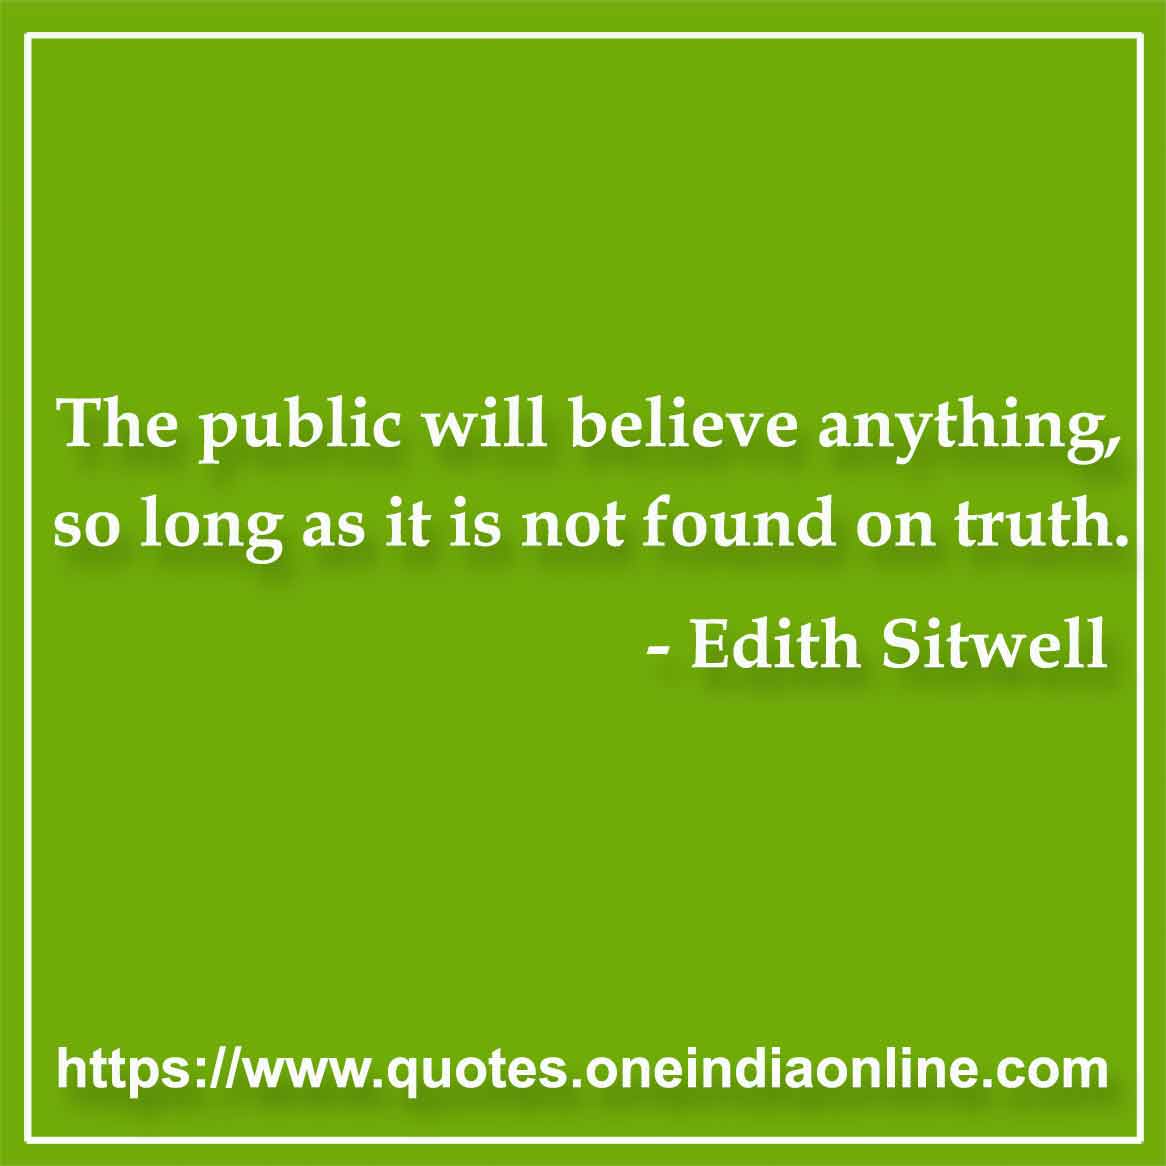 The public will believe anything, so long as it is not found on truth.

- Truth Quotes by Edith Sitwell 